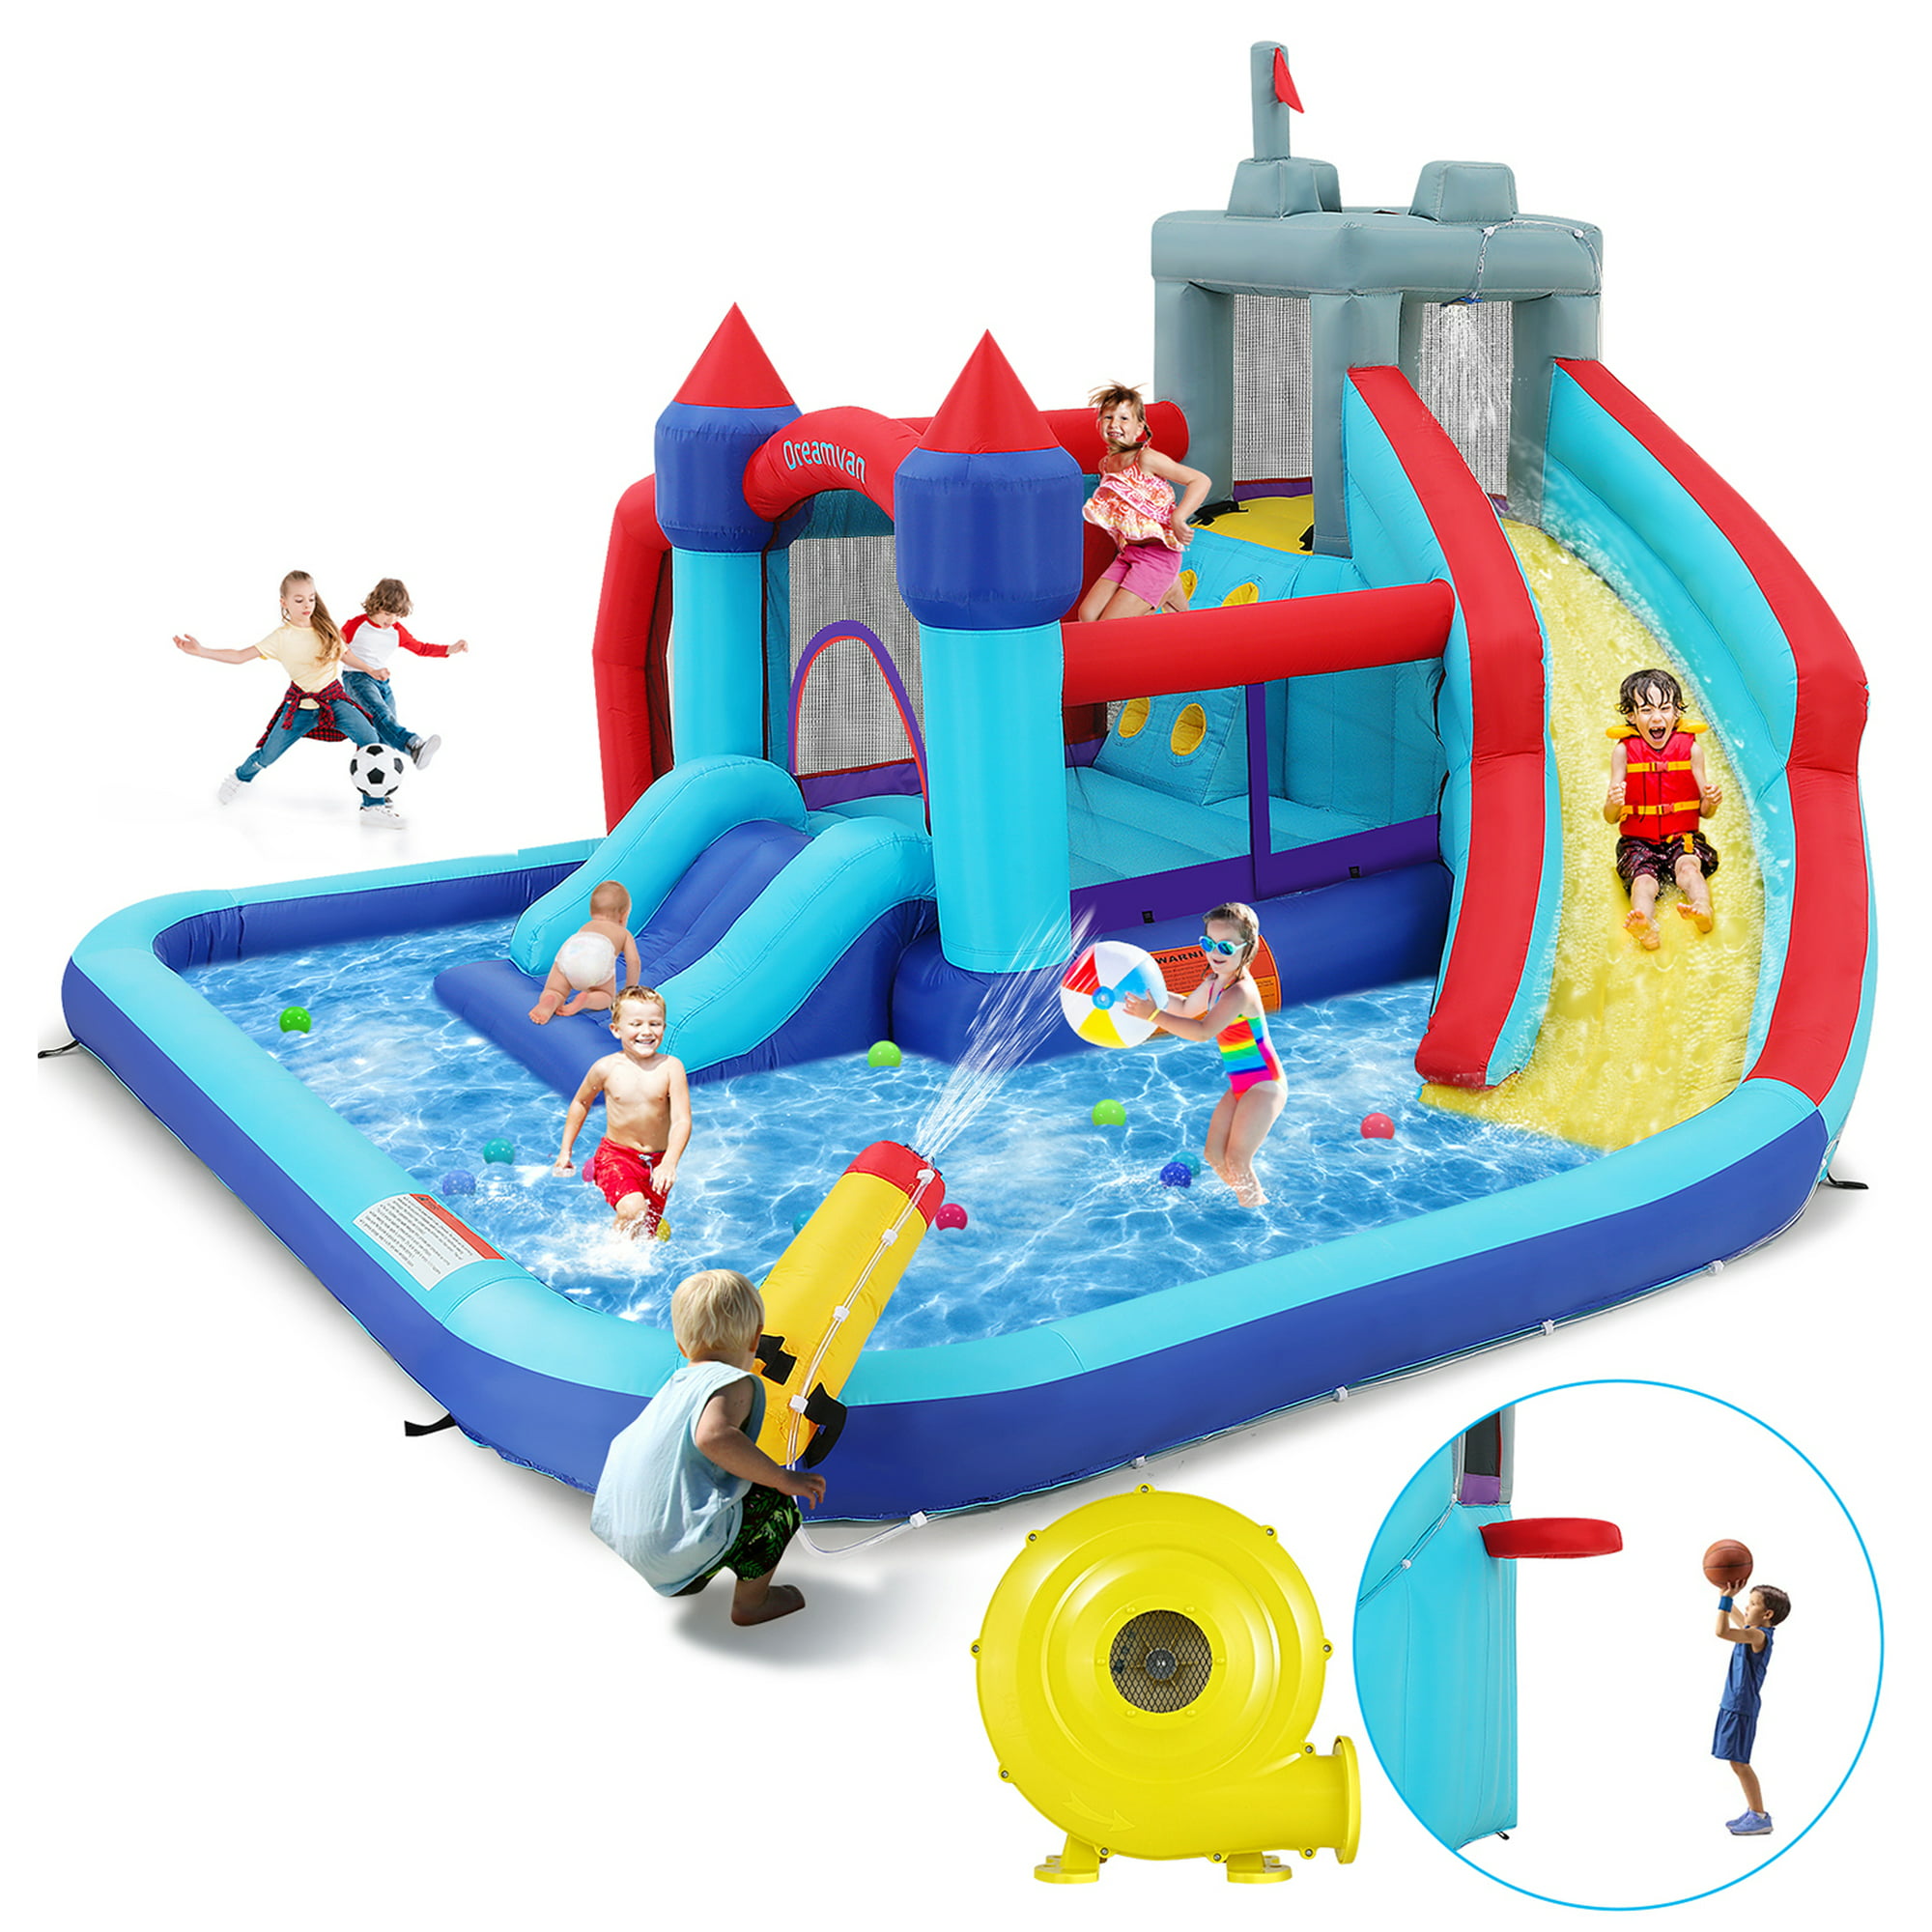 Inflatable Castle Inflatable Water Slide, Bounce House with Blower, Bouncing Slides, Climbing Wall, Basketball Hoop, Water Gun, Football Area